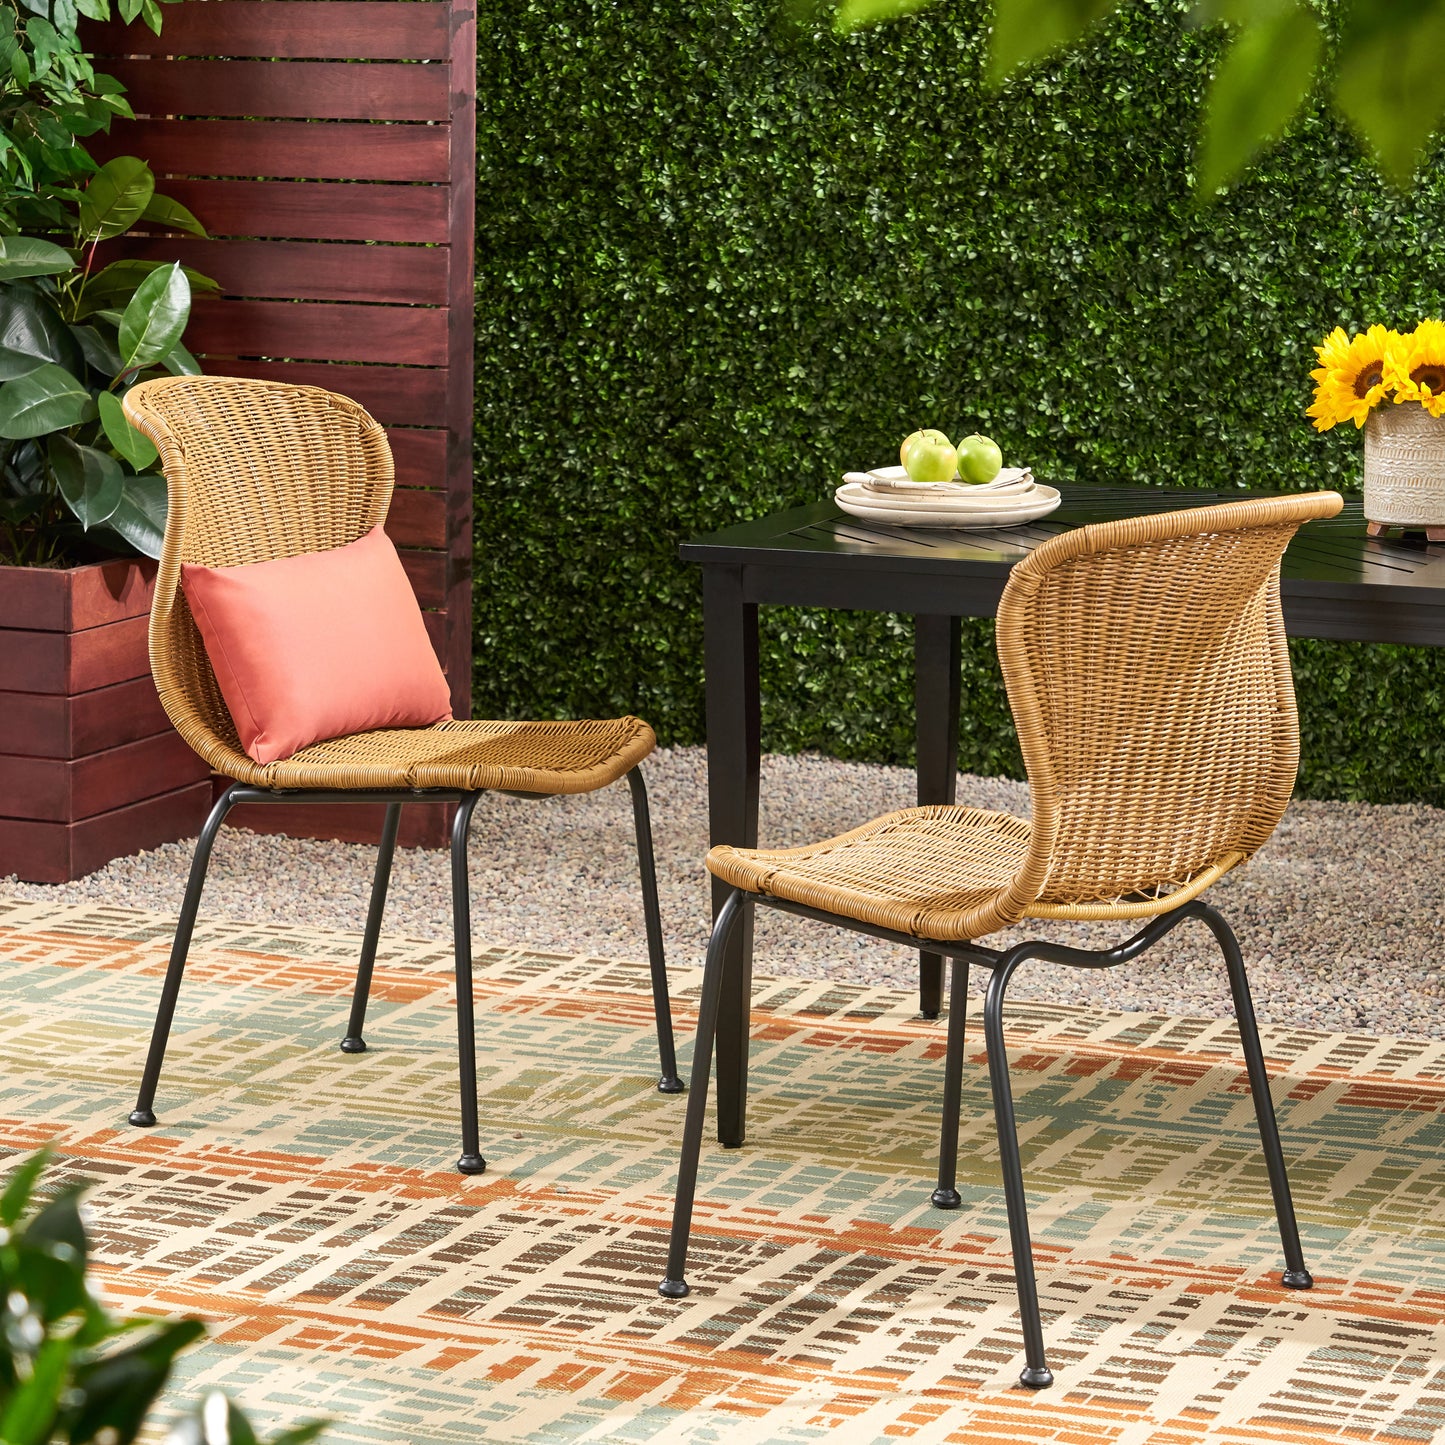 Akim Outdoor Boho Wicker Dining Chair (Set of 2)